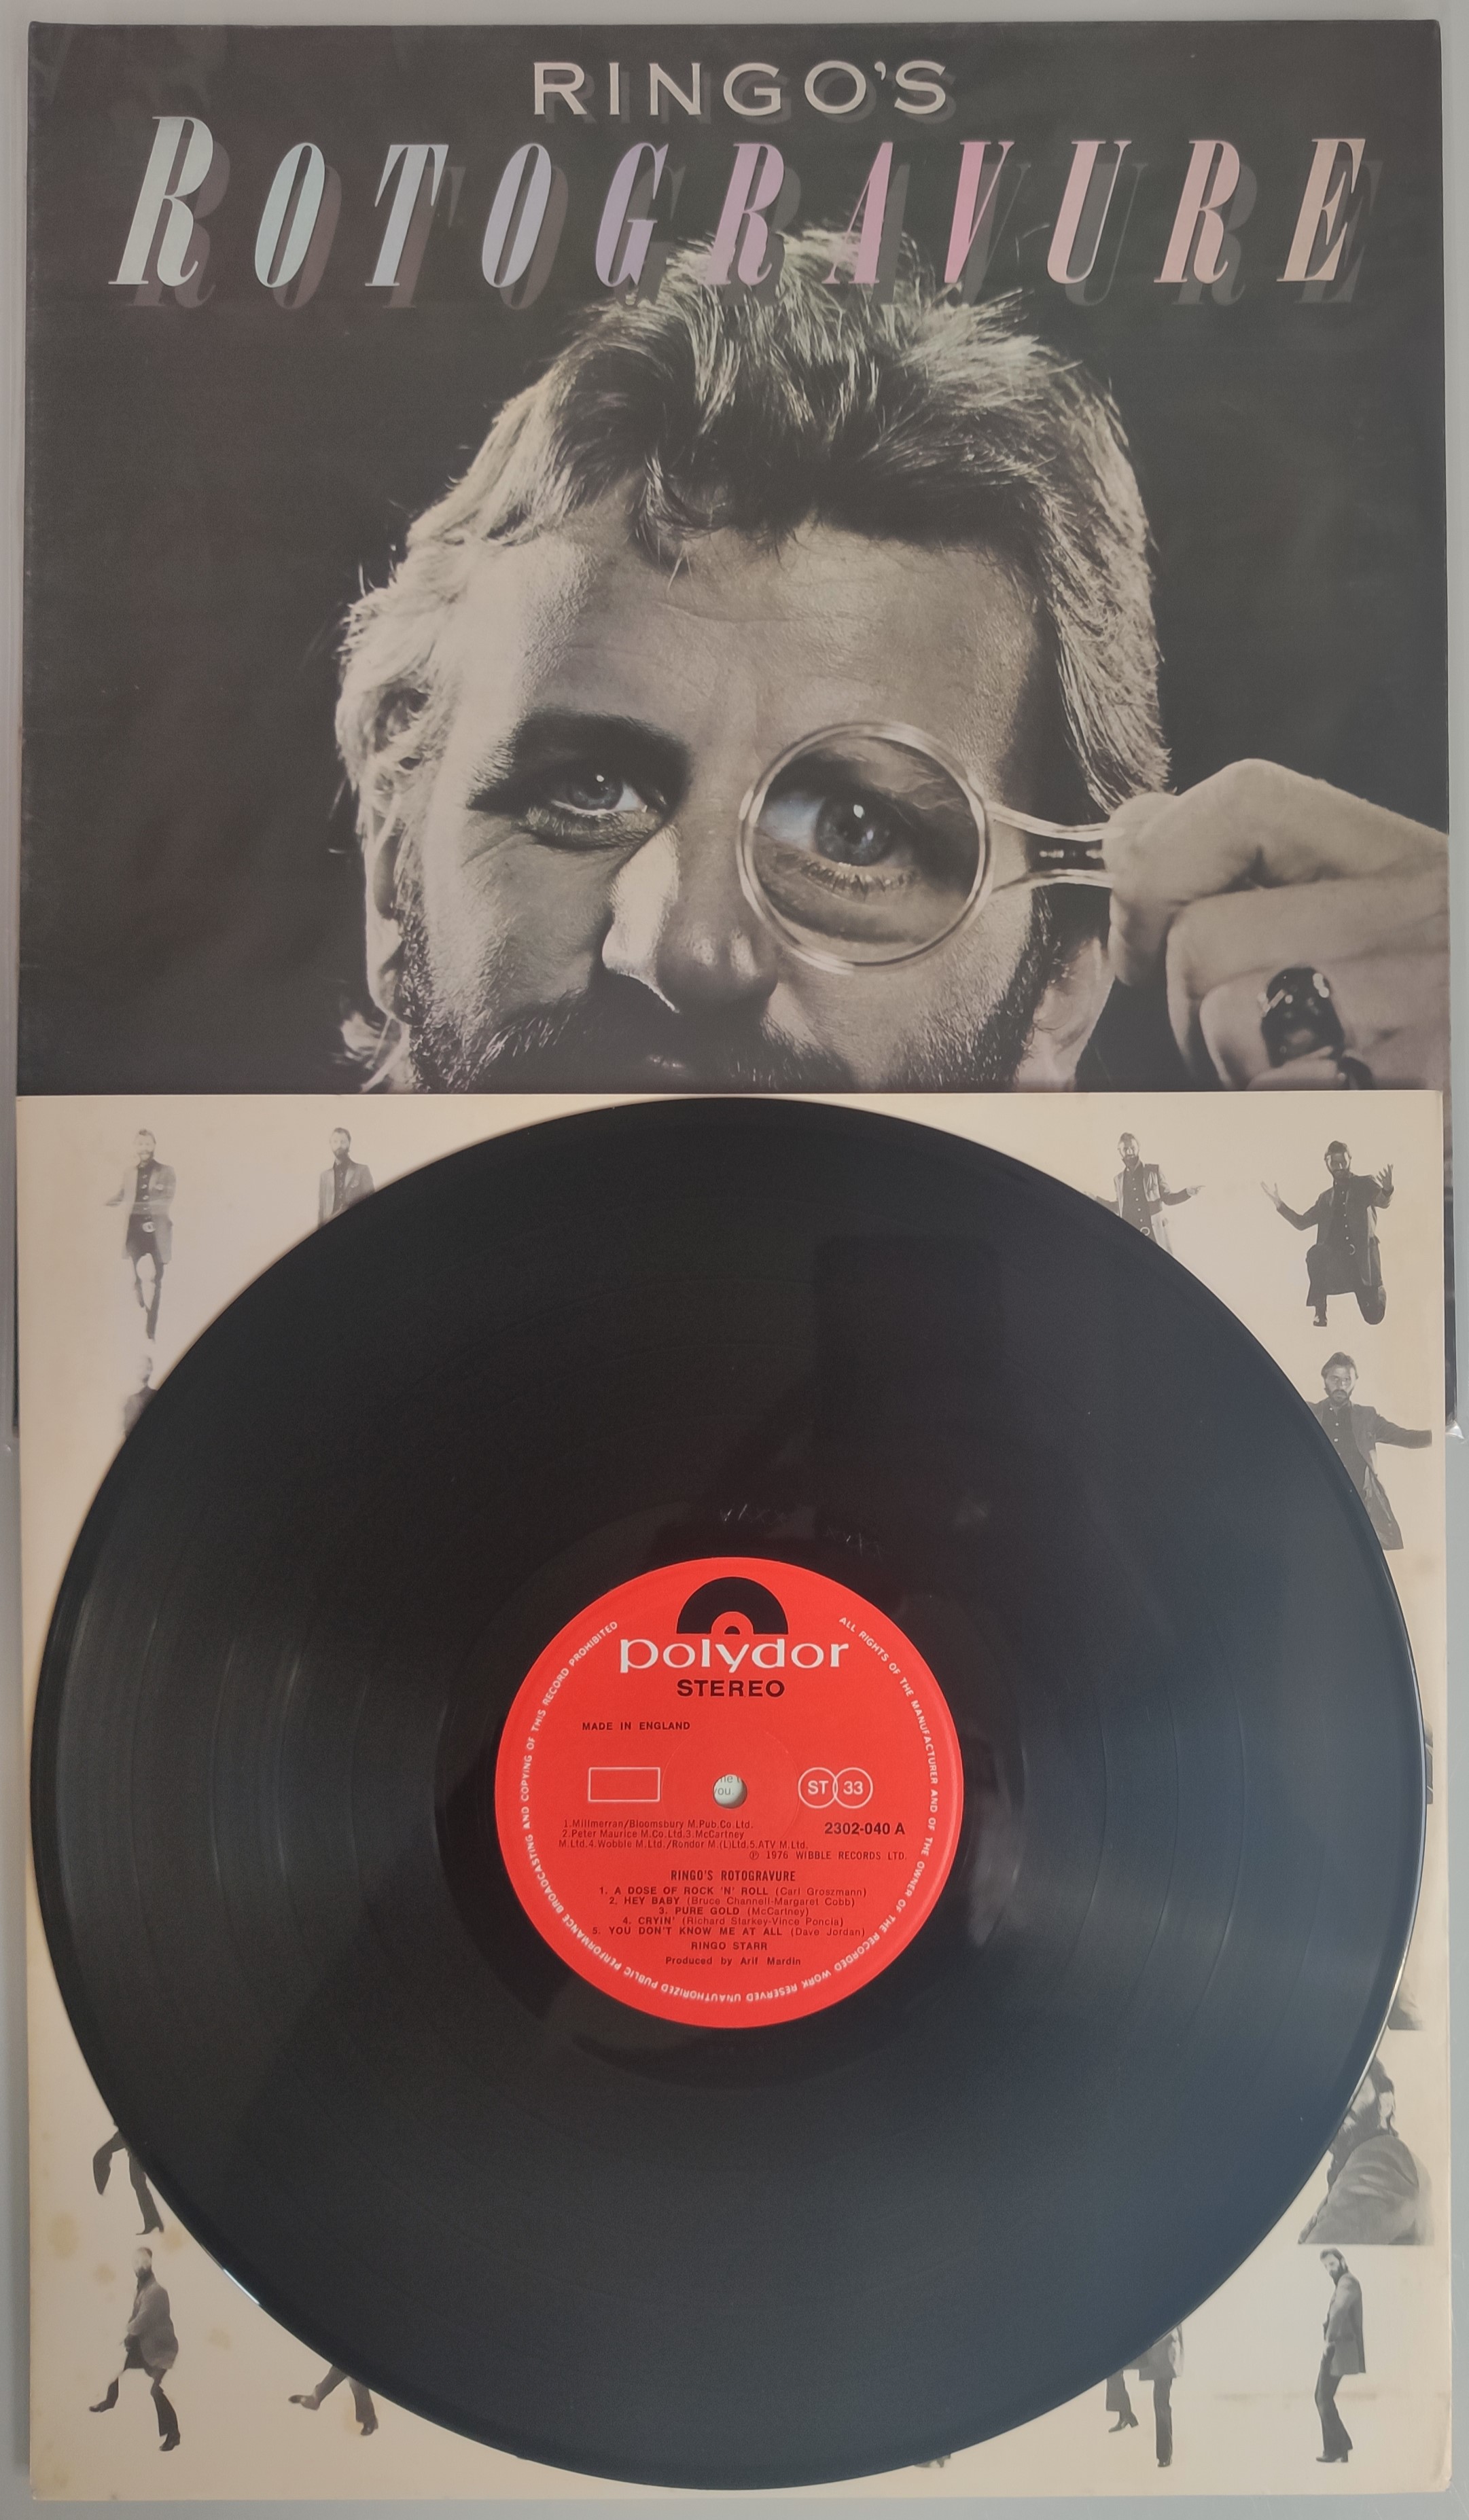 A Collection of 3 x Ringo Starr – Rotogravure Vinyl LP – 1976 UK Pressing and US First Pressings. - Image 2 of 5